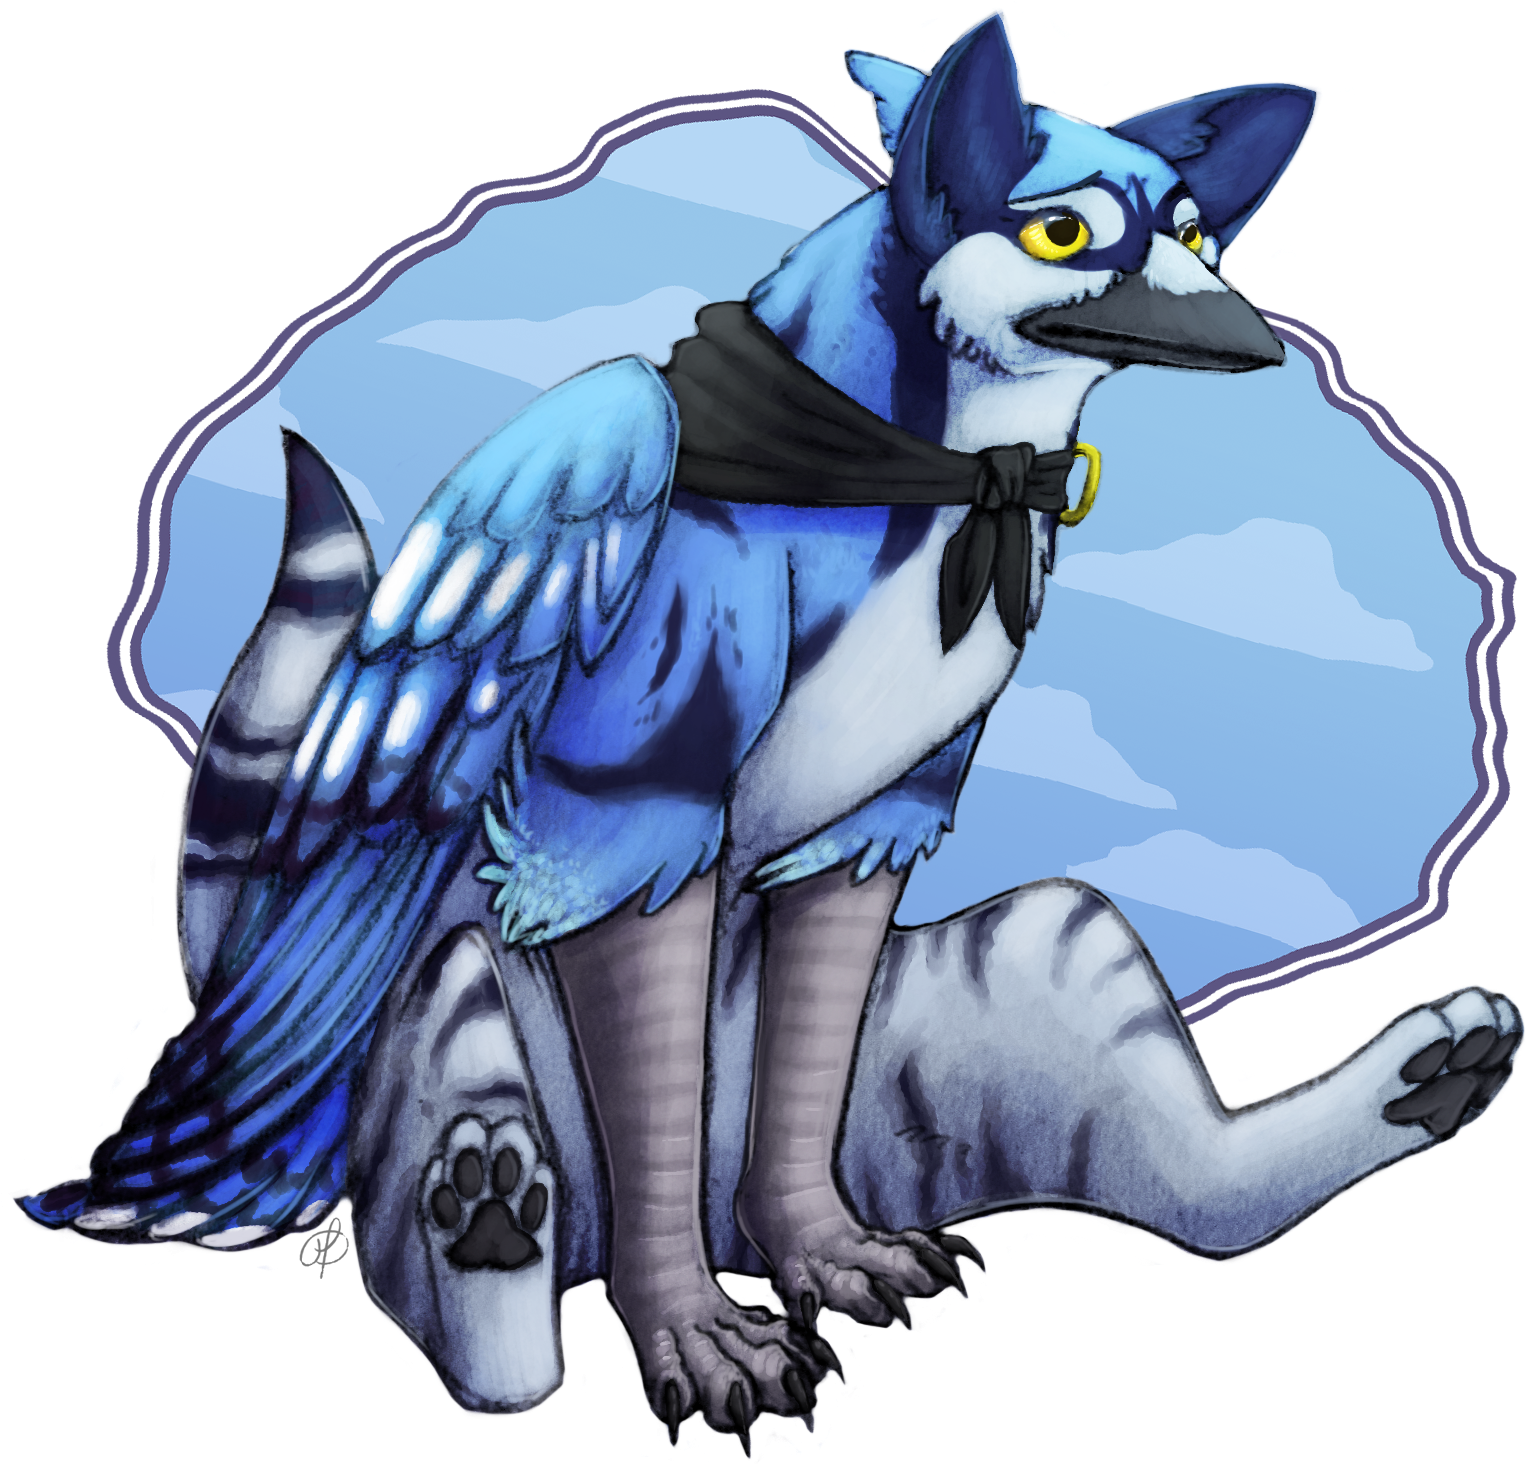 Gryphon Qc By Howlingwolf201 Gryphon Qc By Howlingwolf201 - Anthro Gryphon (1728x1554)